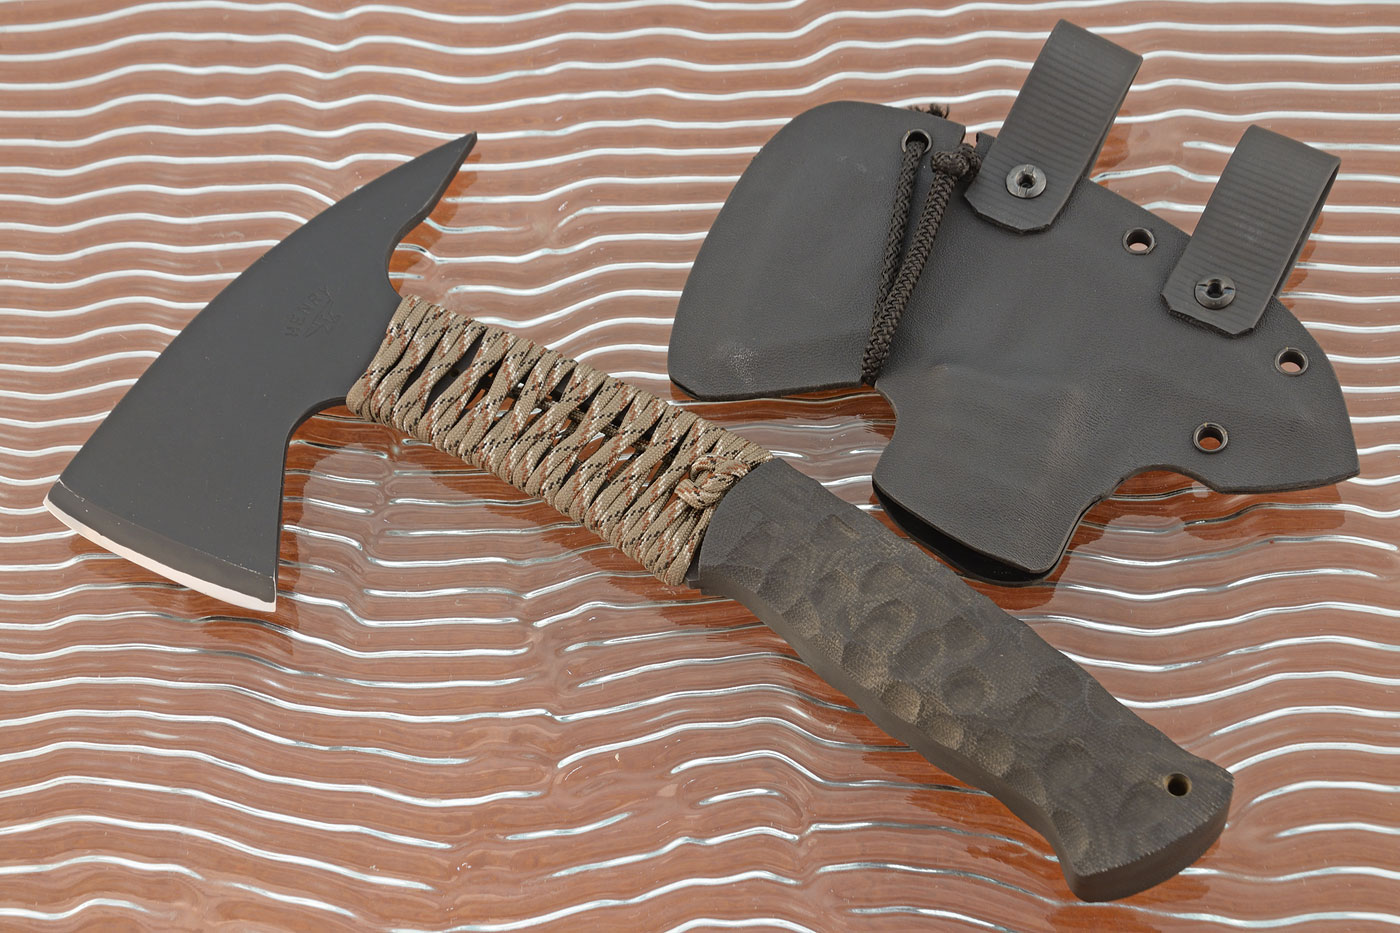 Tactical Compact Hawk with Sculpted Micarta and Camo Paracord